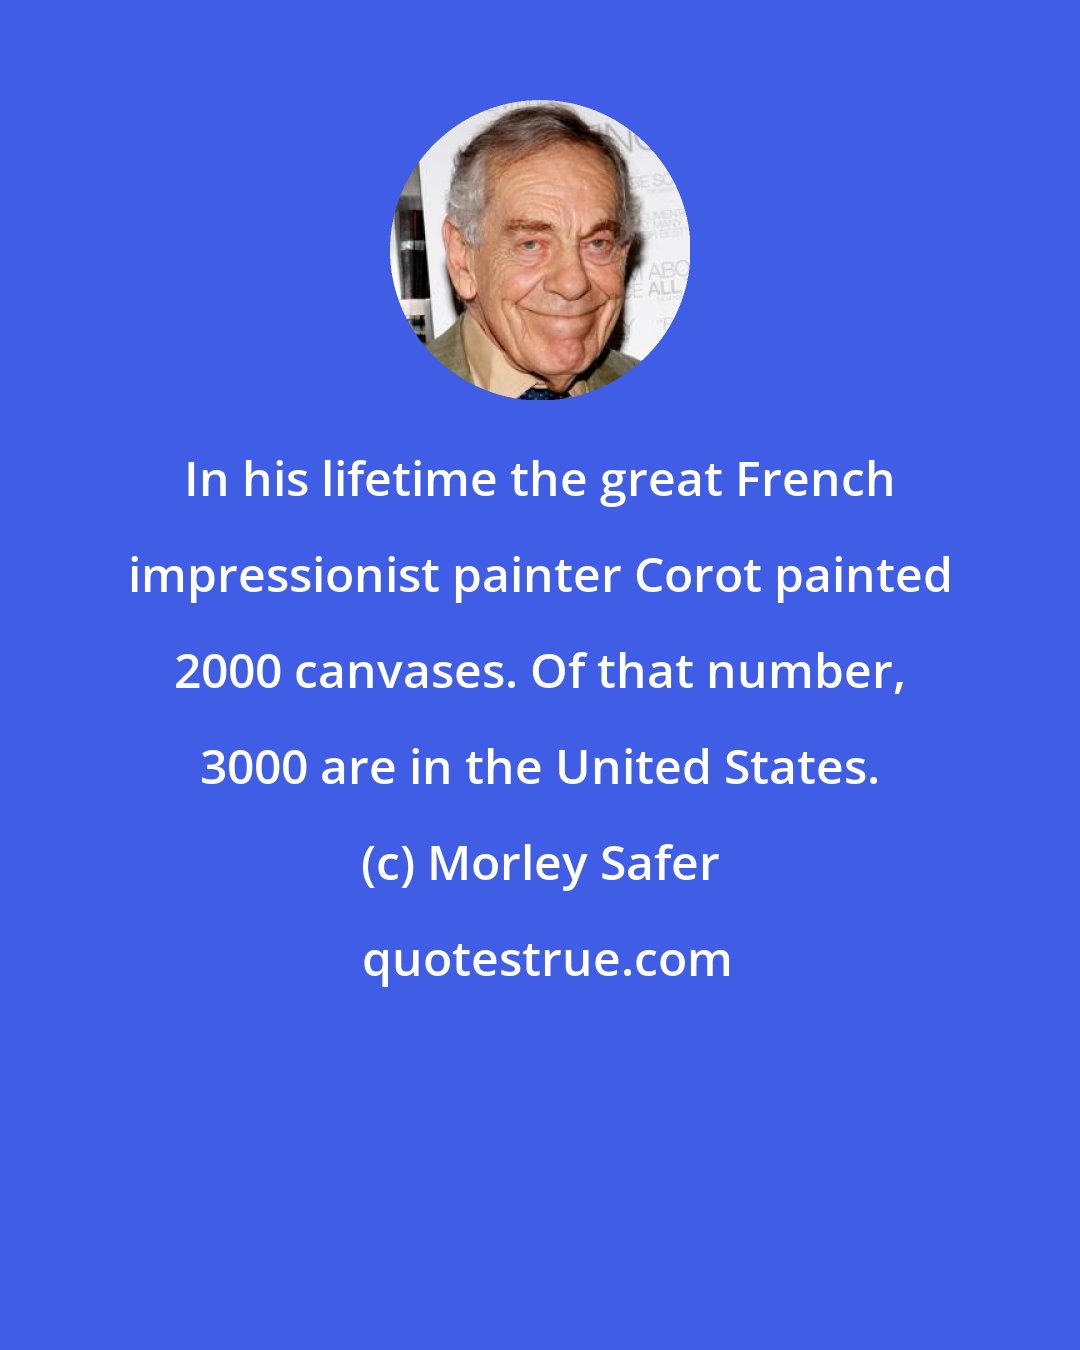 Morley Safer: In his lifetime the great French impressionist painter Corot painted 2000 canvases. Of that number, 3000 are in the United States.